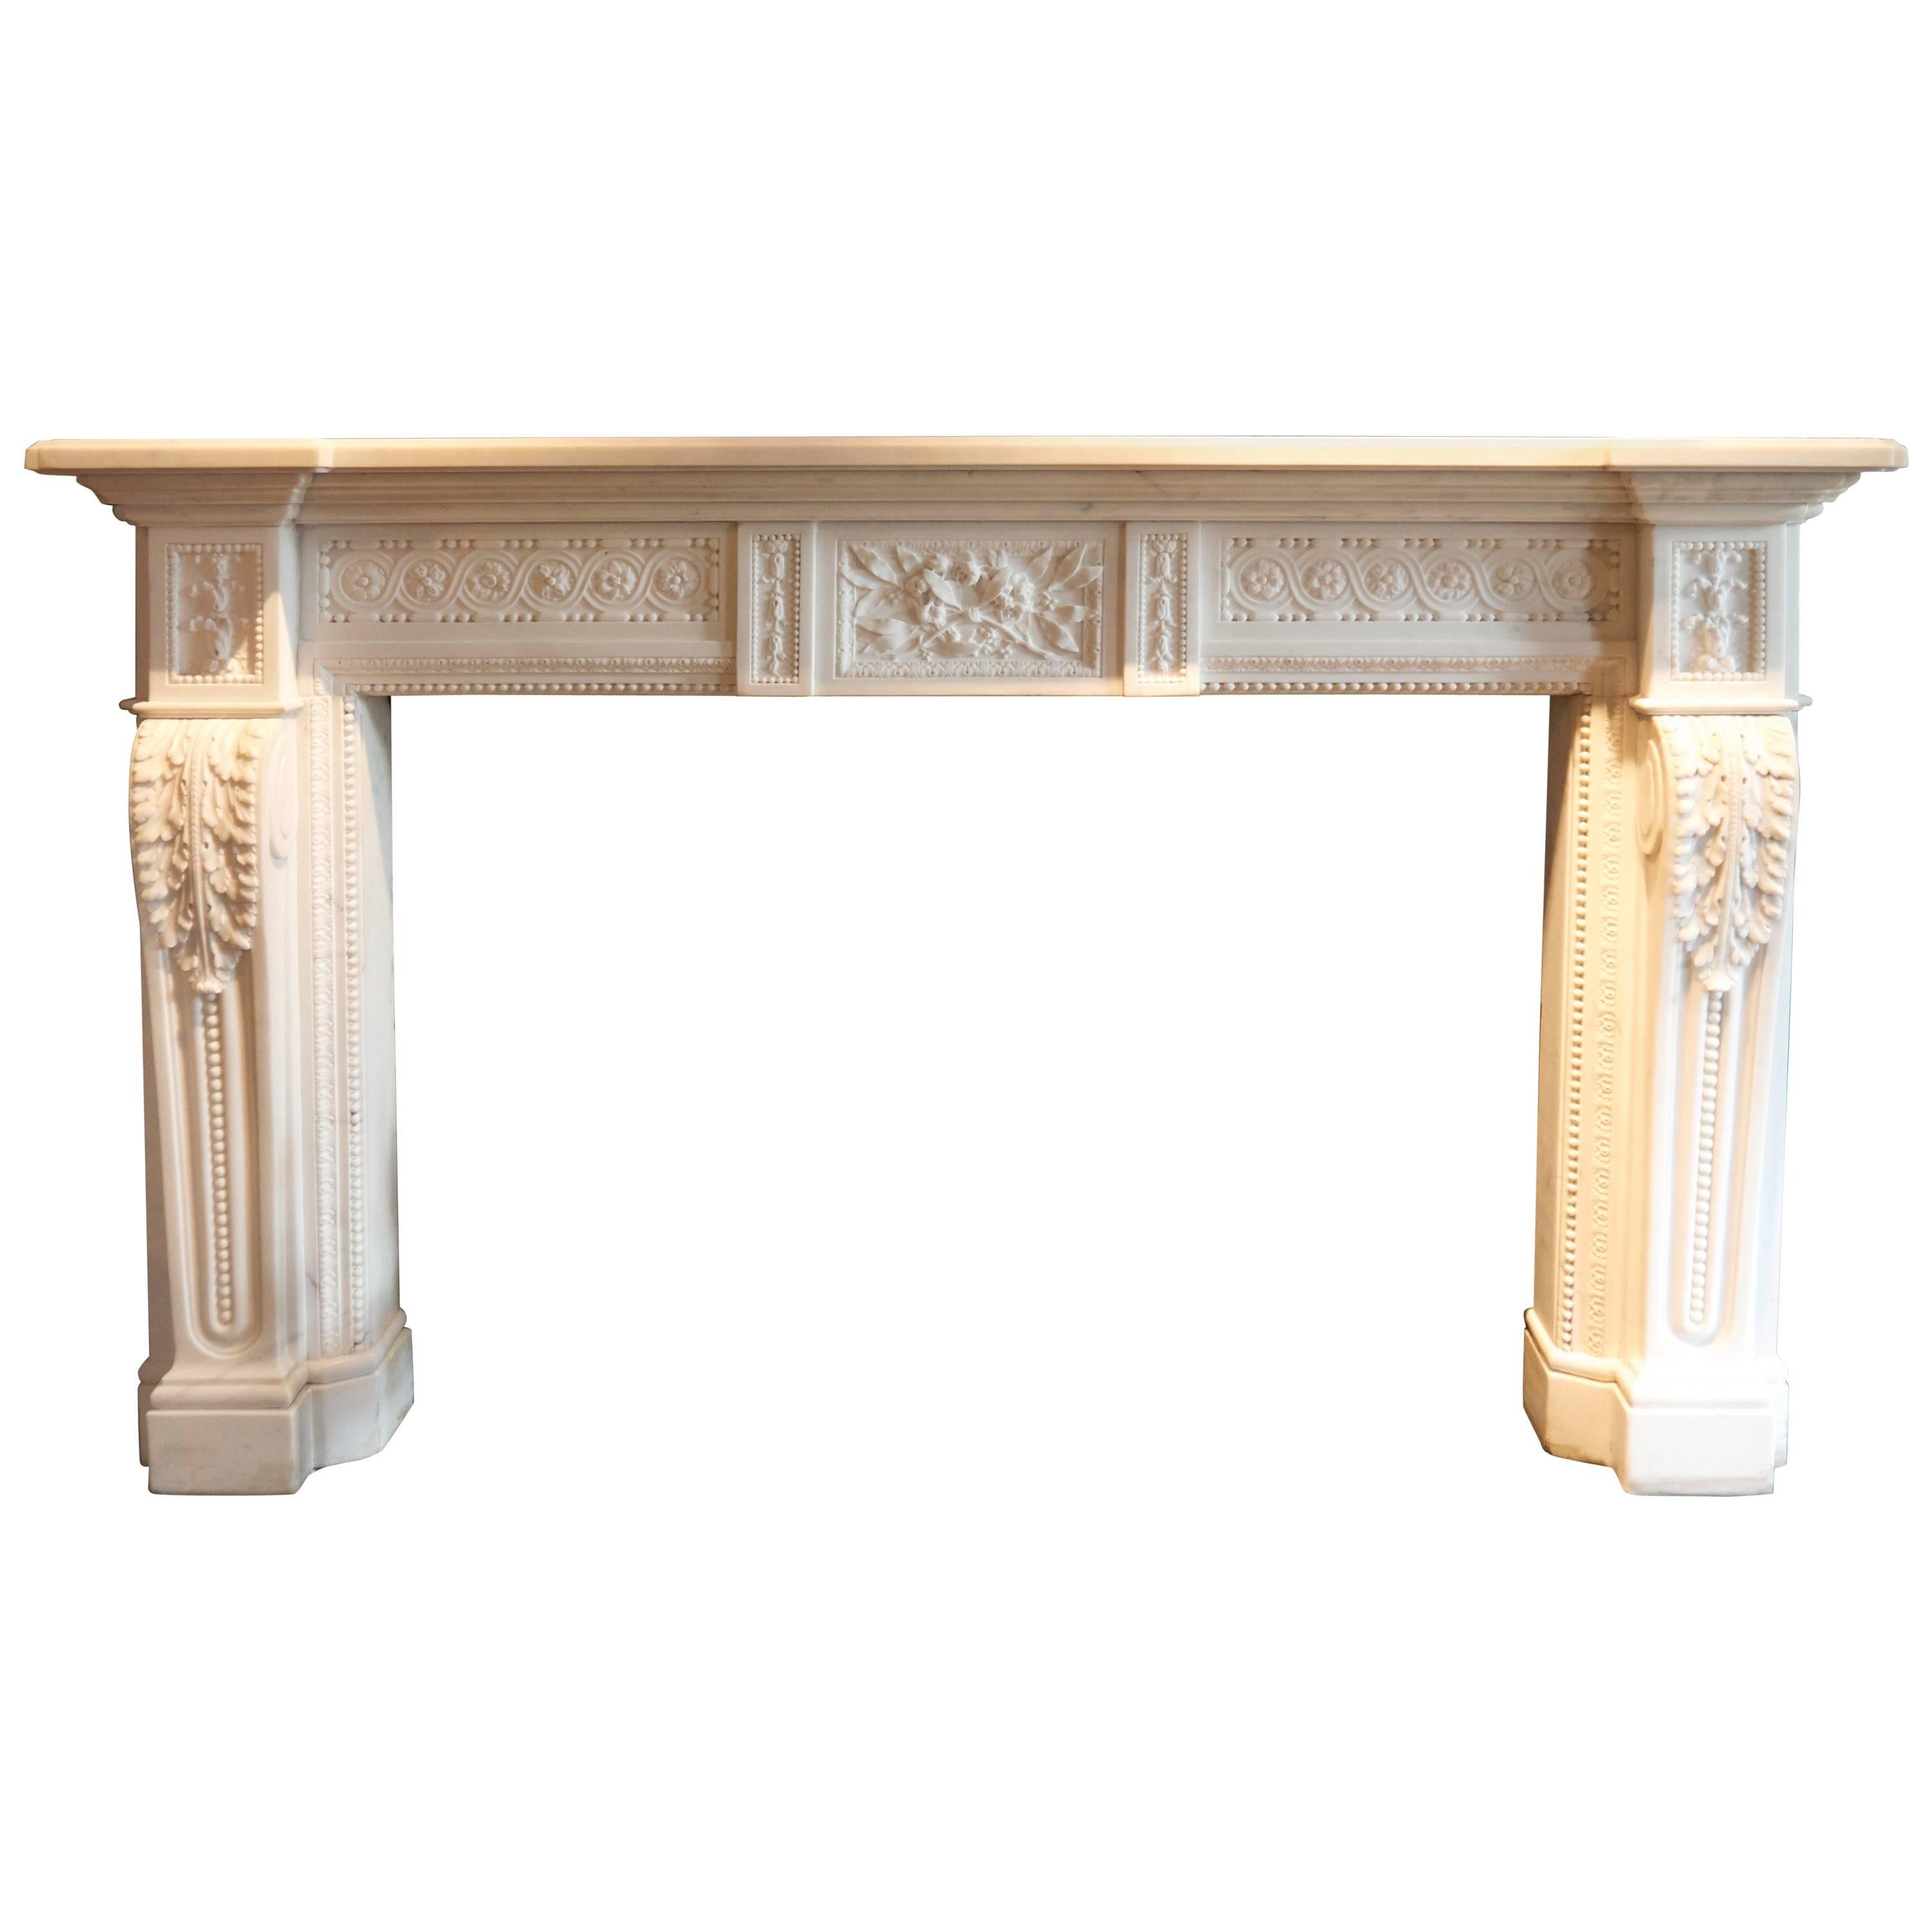 Very Impressive Heavily Carved Louis XVI Marble Surround